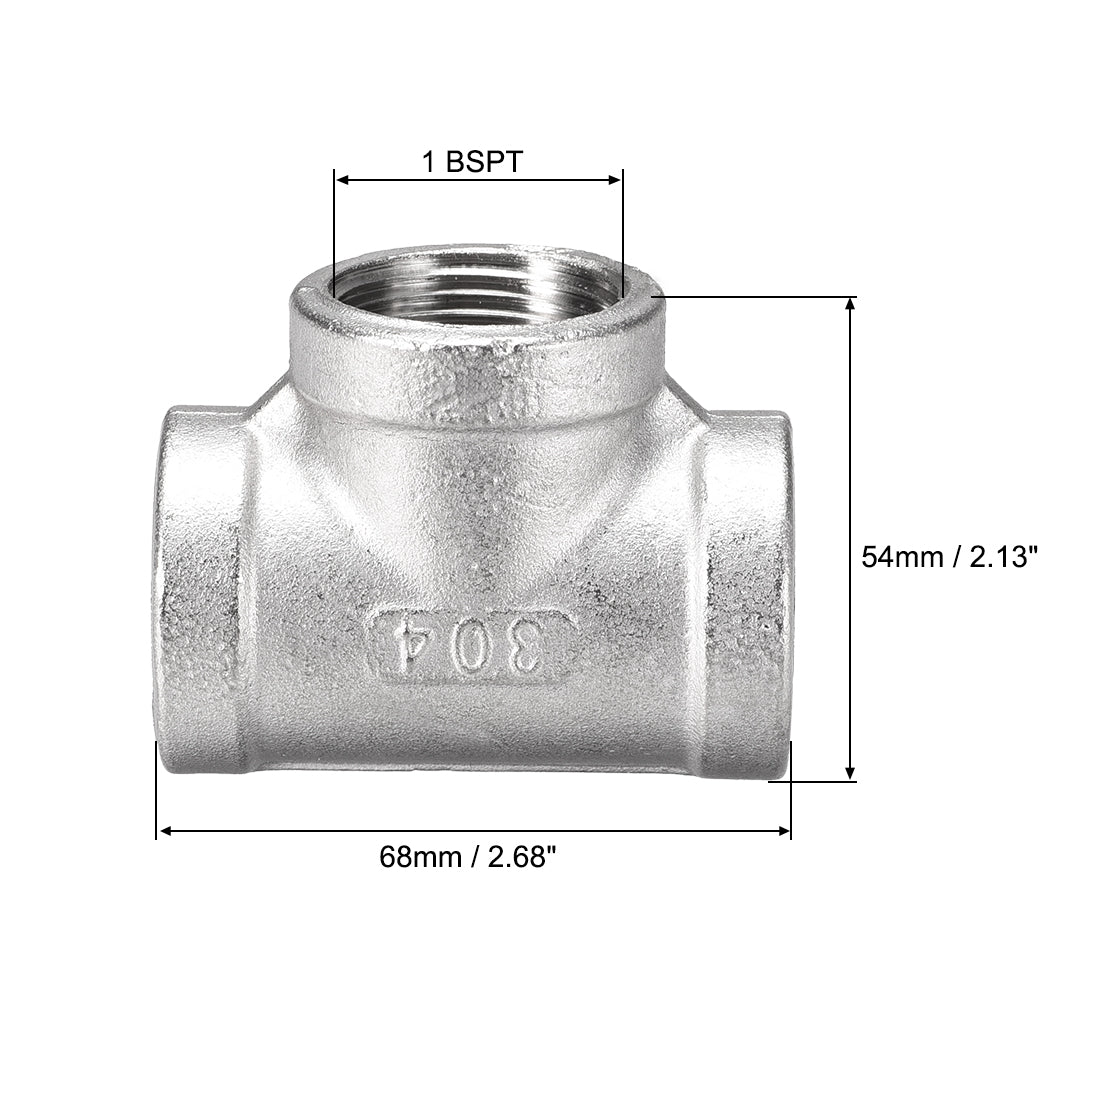 uxcell Uxcell Stainless Steel 304 Cast  Pipe Fitting 1 BSPT Female Thread Class 150 Tee Shaped Connector Coupler 2pcs